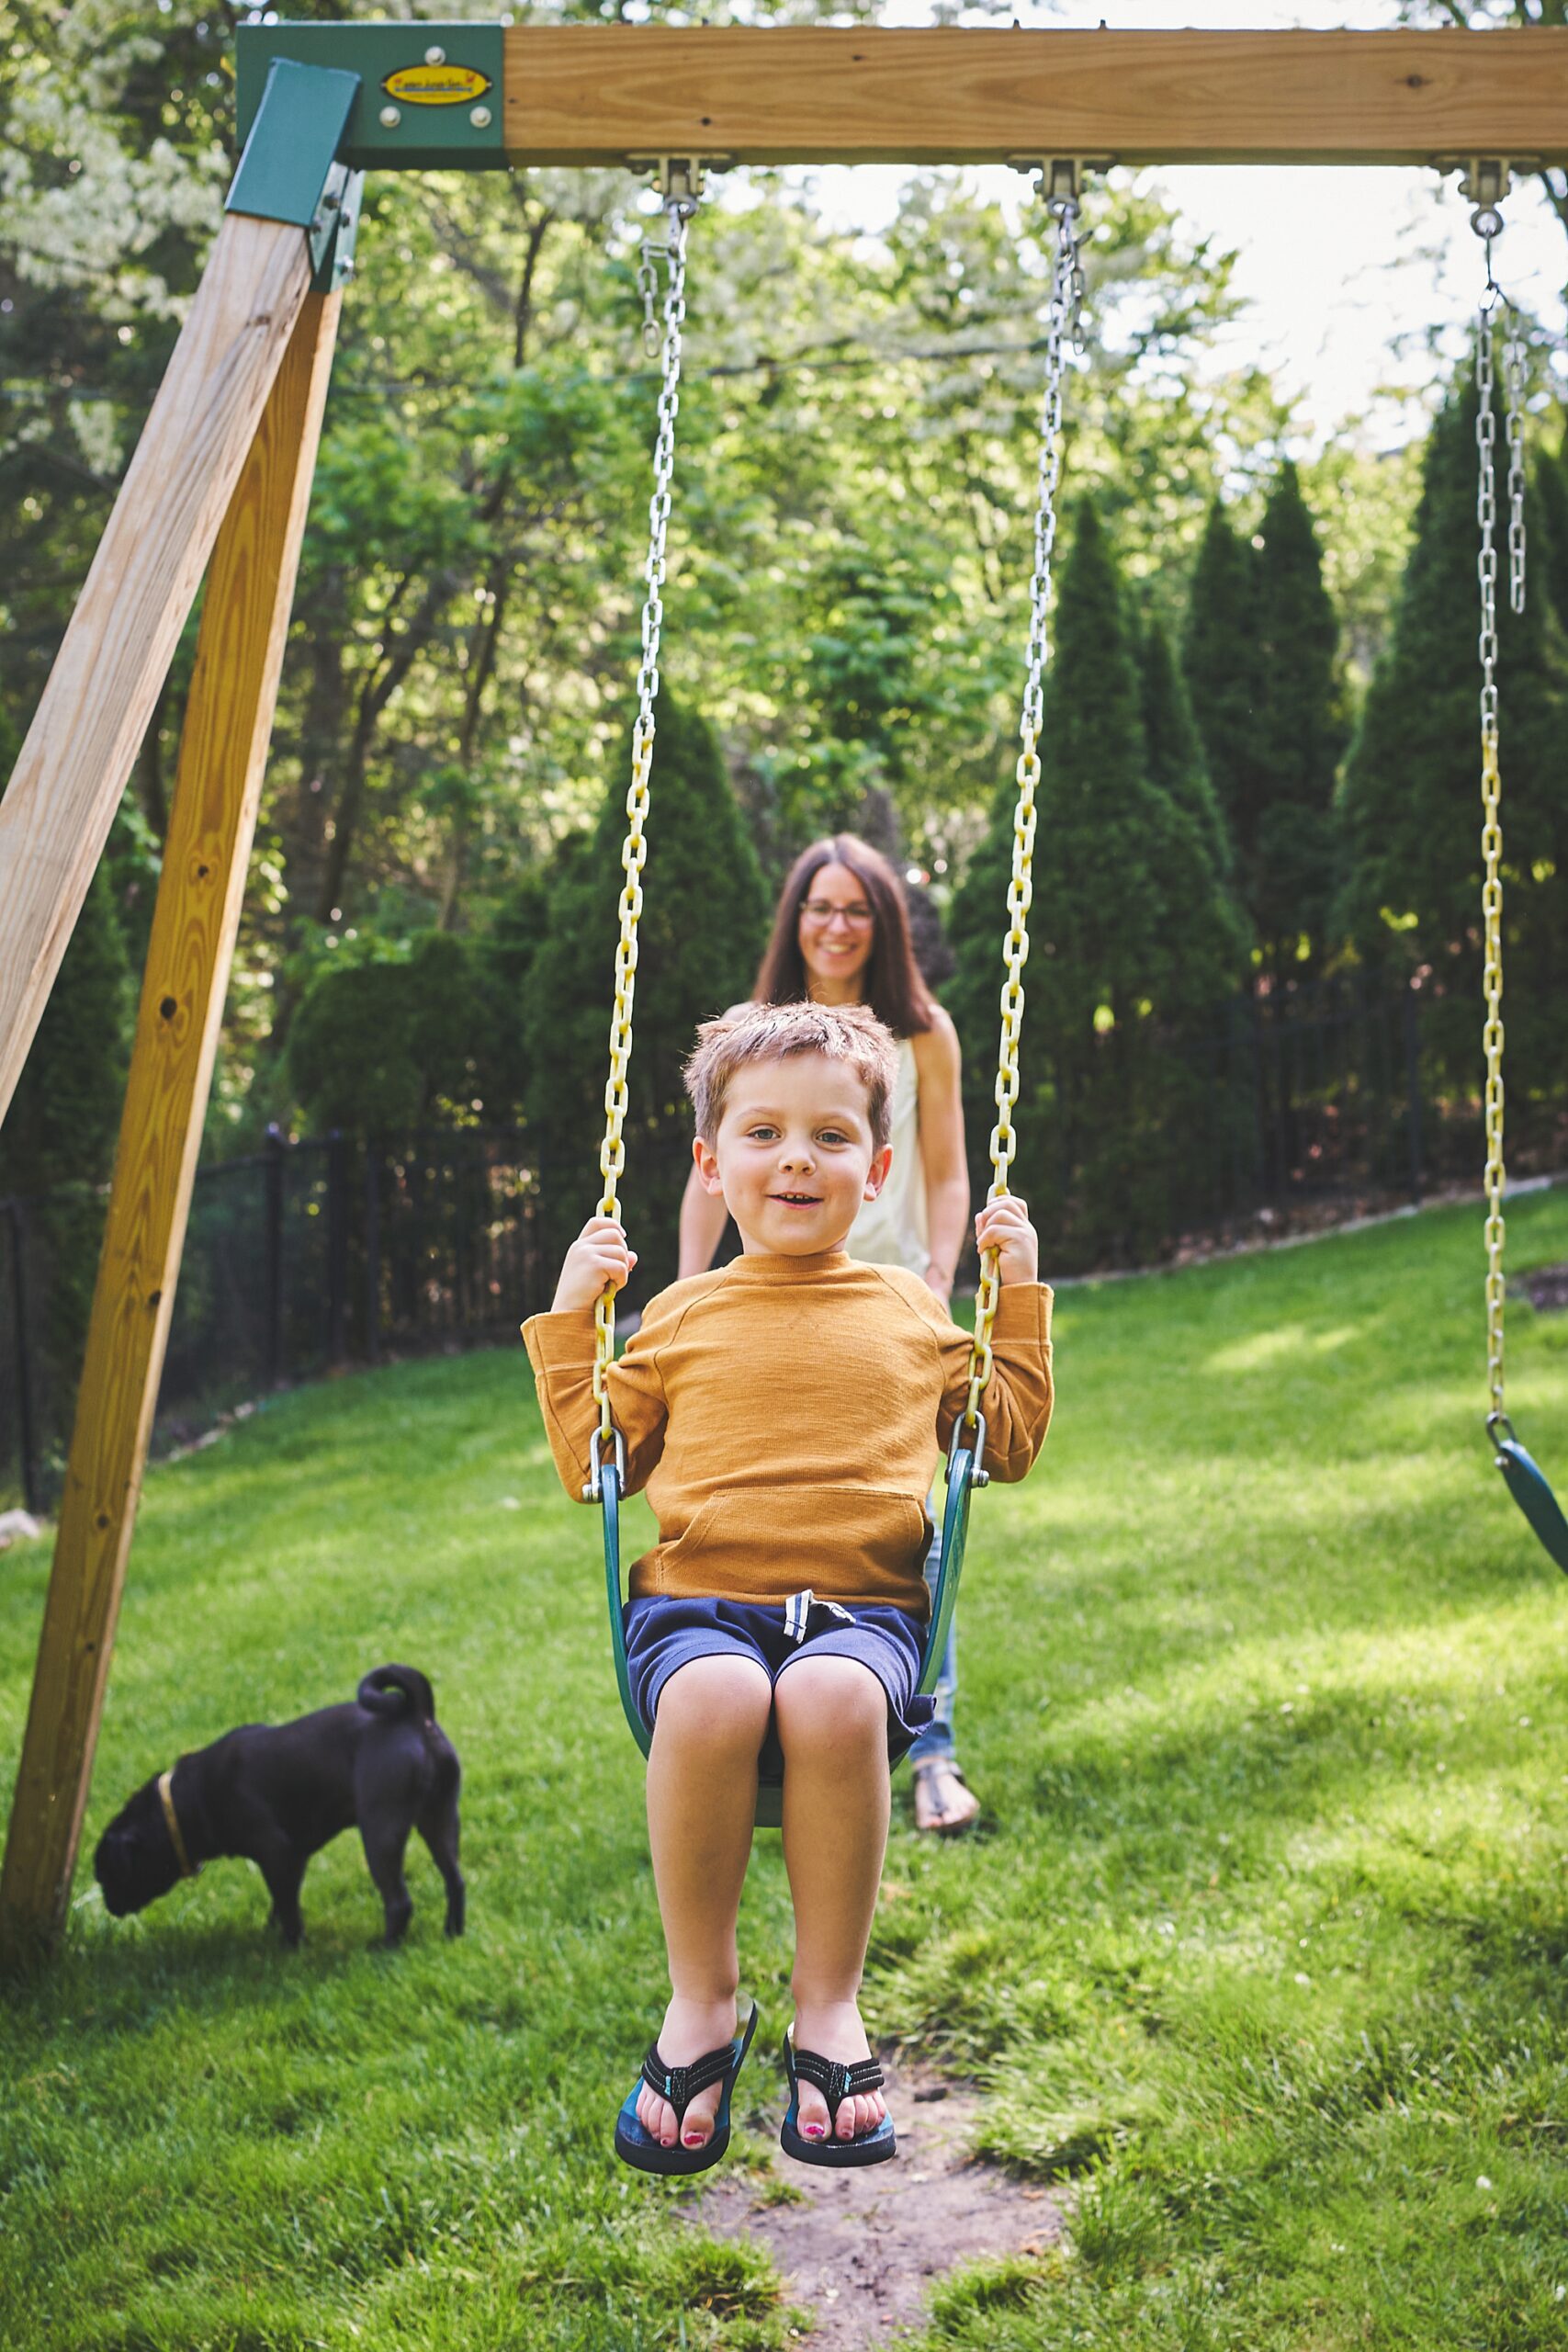 A smiling child on a swing with a woman standing behind and a small black dog in the background on a sunny day.